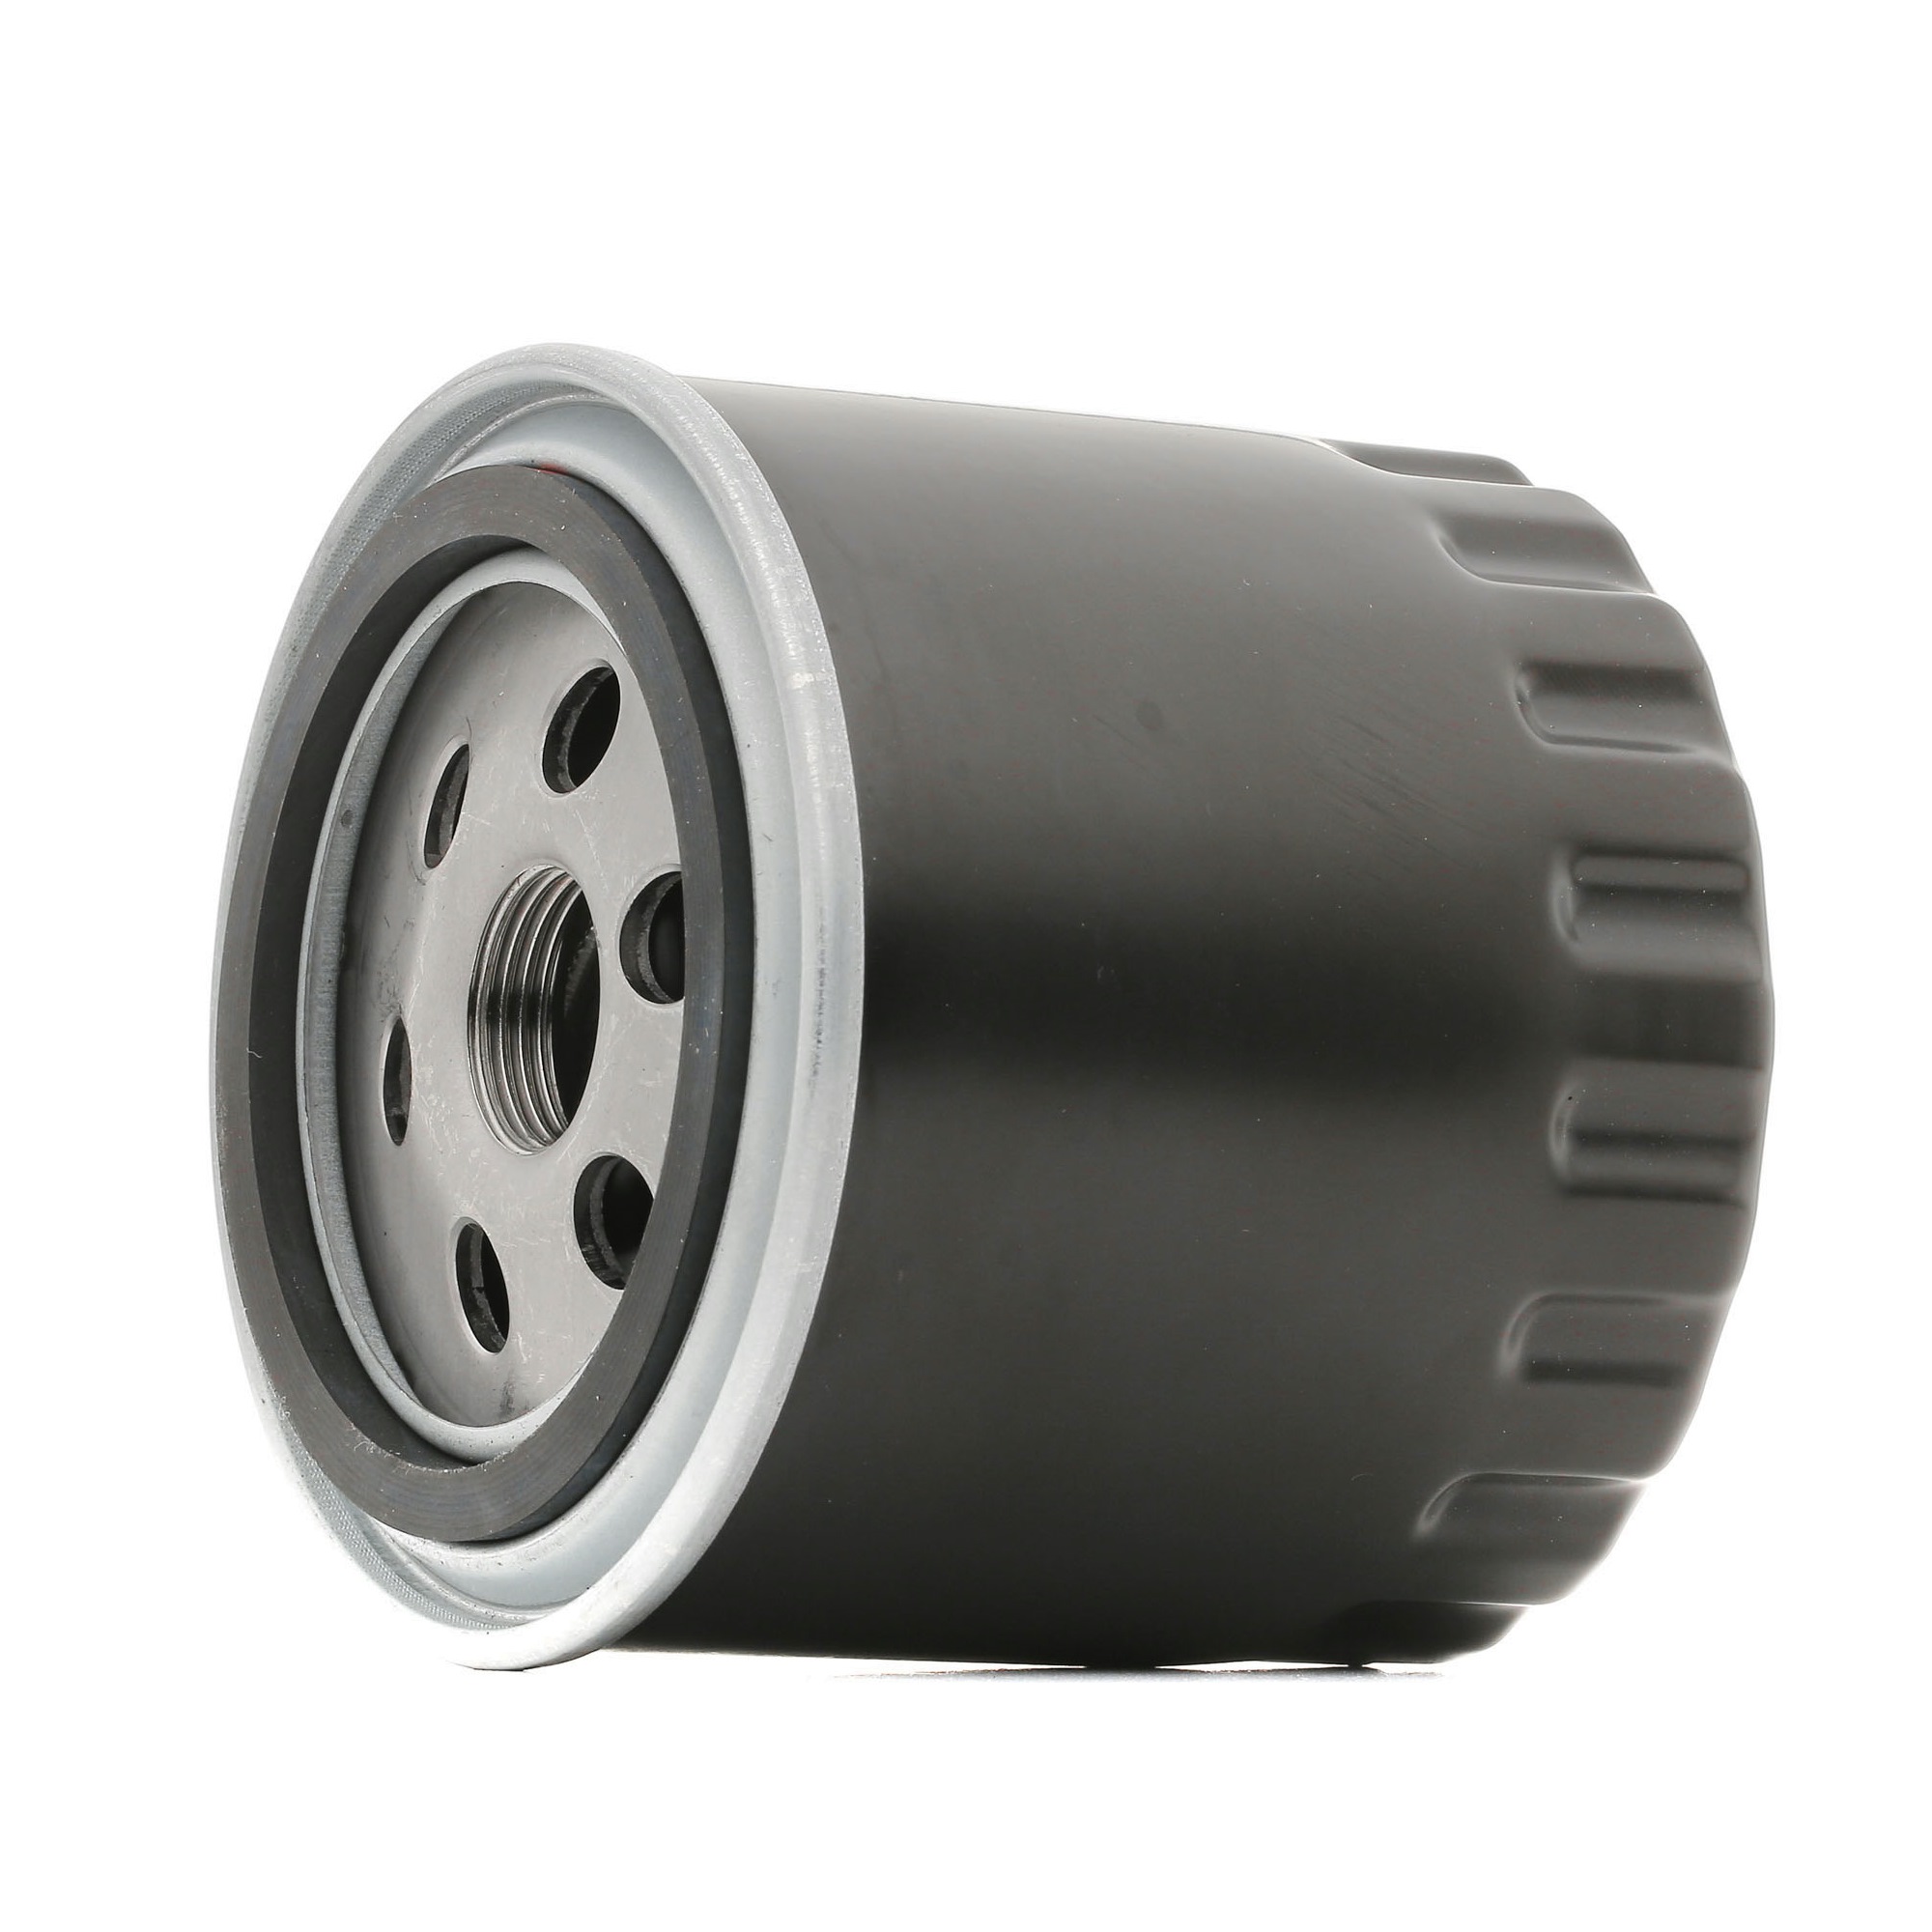 RIDEX 7O0196 Oil filter M 20 X 1.5, with one anti-return valve, Spin-on Filter